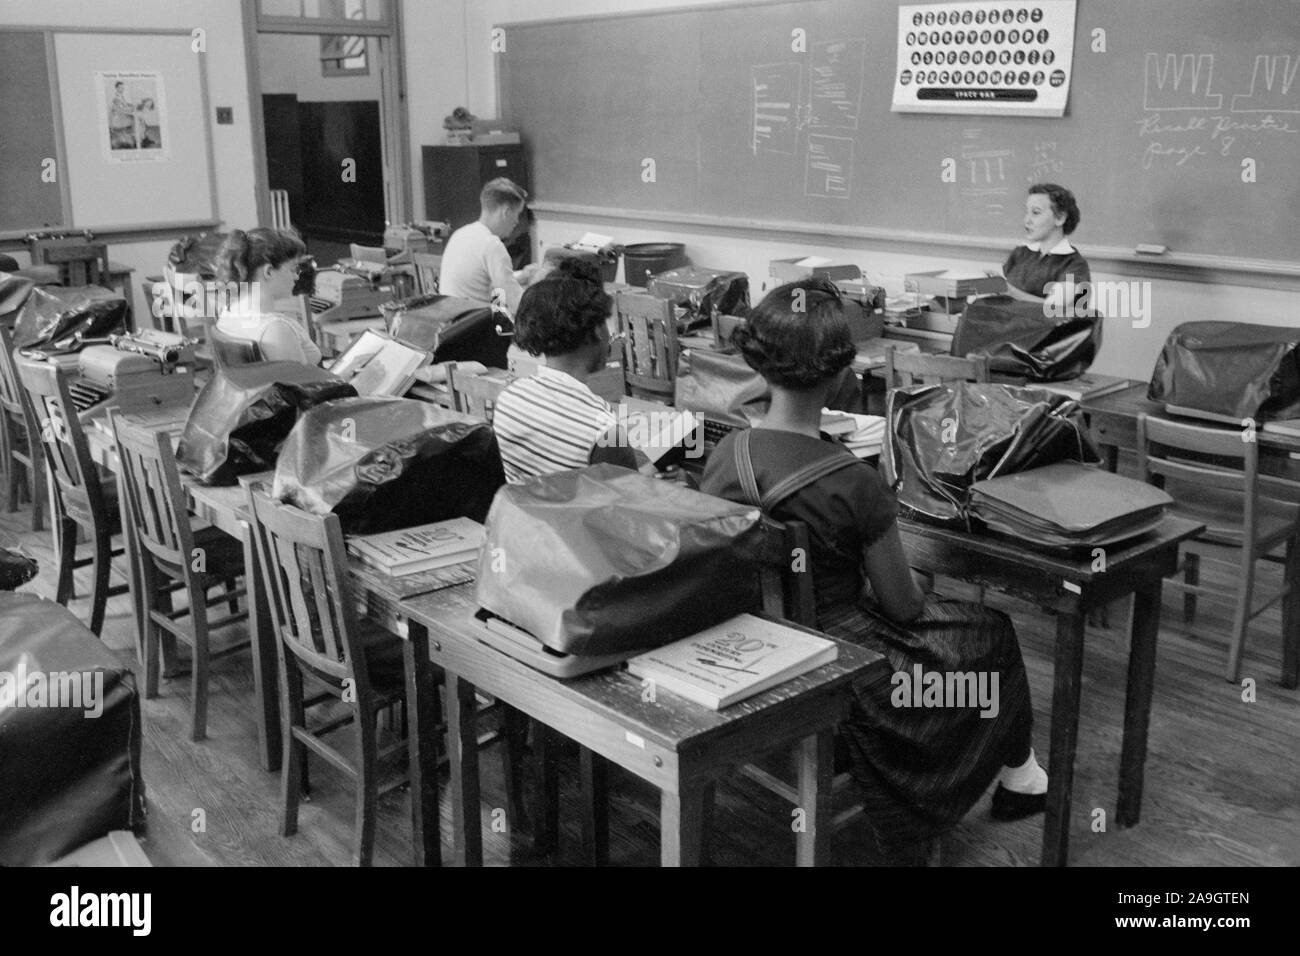 Integrated Classroom showing Empty Seats during Period of Violence Related to School Integration, Clinton, Tennessee, USA, photograph by Thomas J. O'Halloran, September 1956 Stock Photo